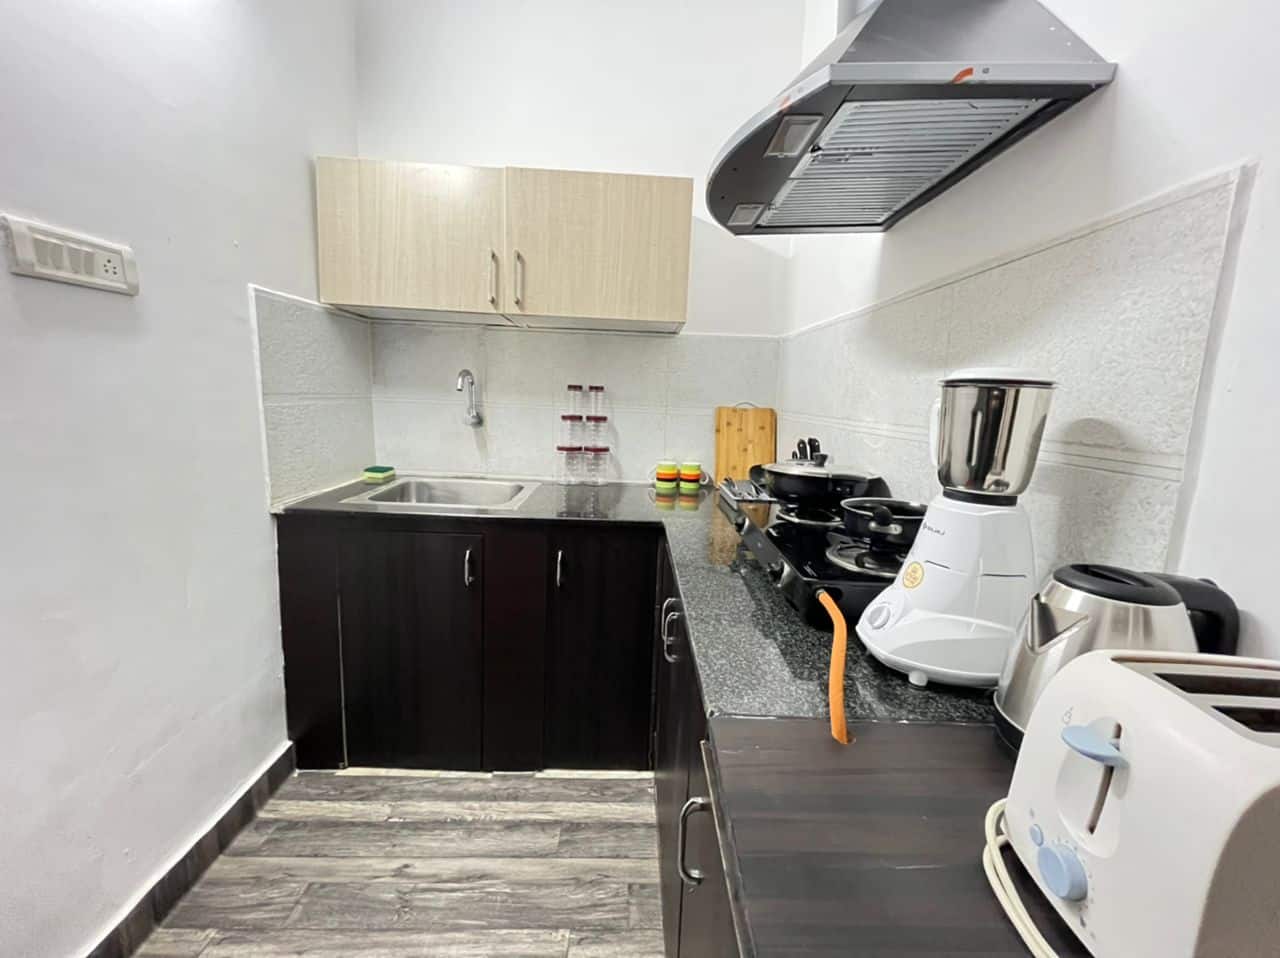 Kitchen area, Dining Area, Living Area, Sofa Section, 1 BHK Service apartment with Bathtub & Balcony